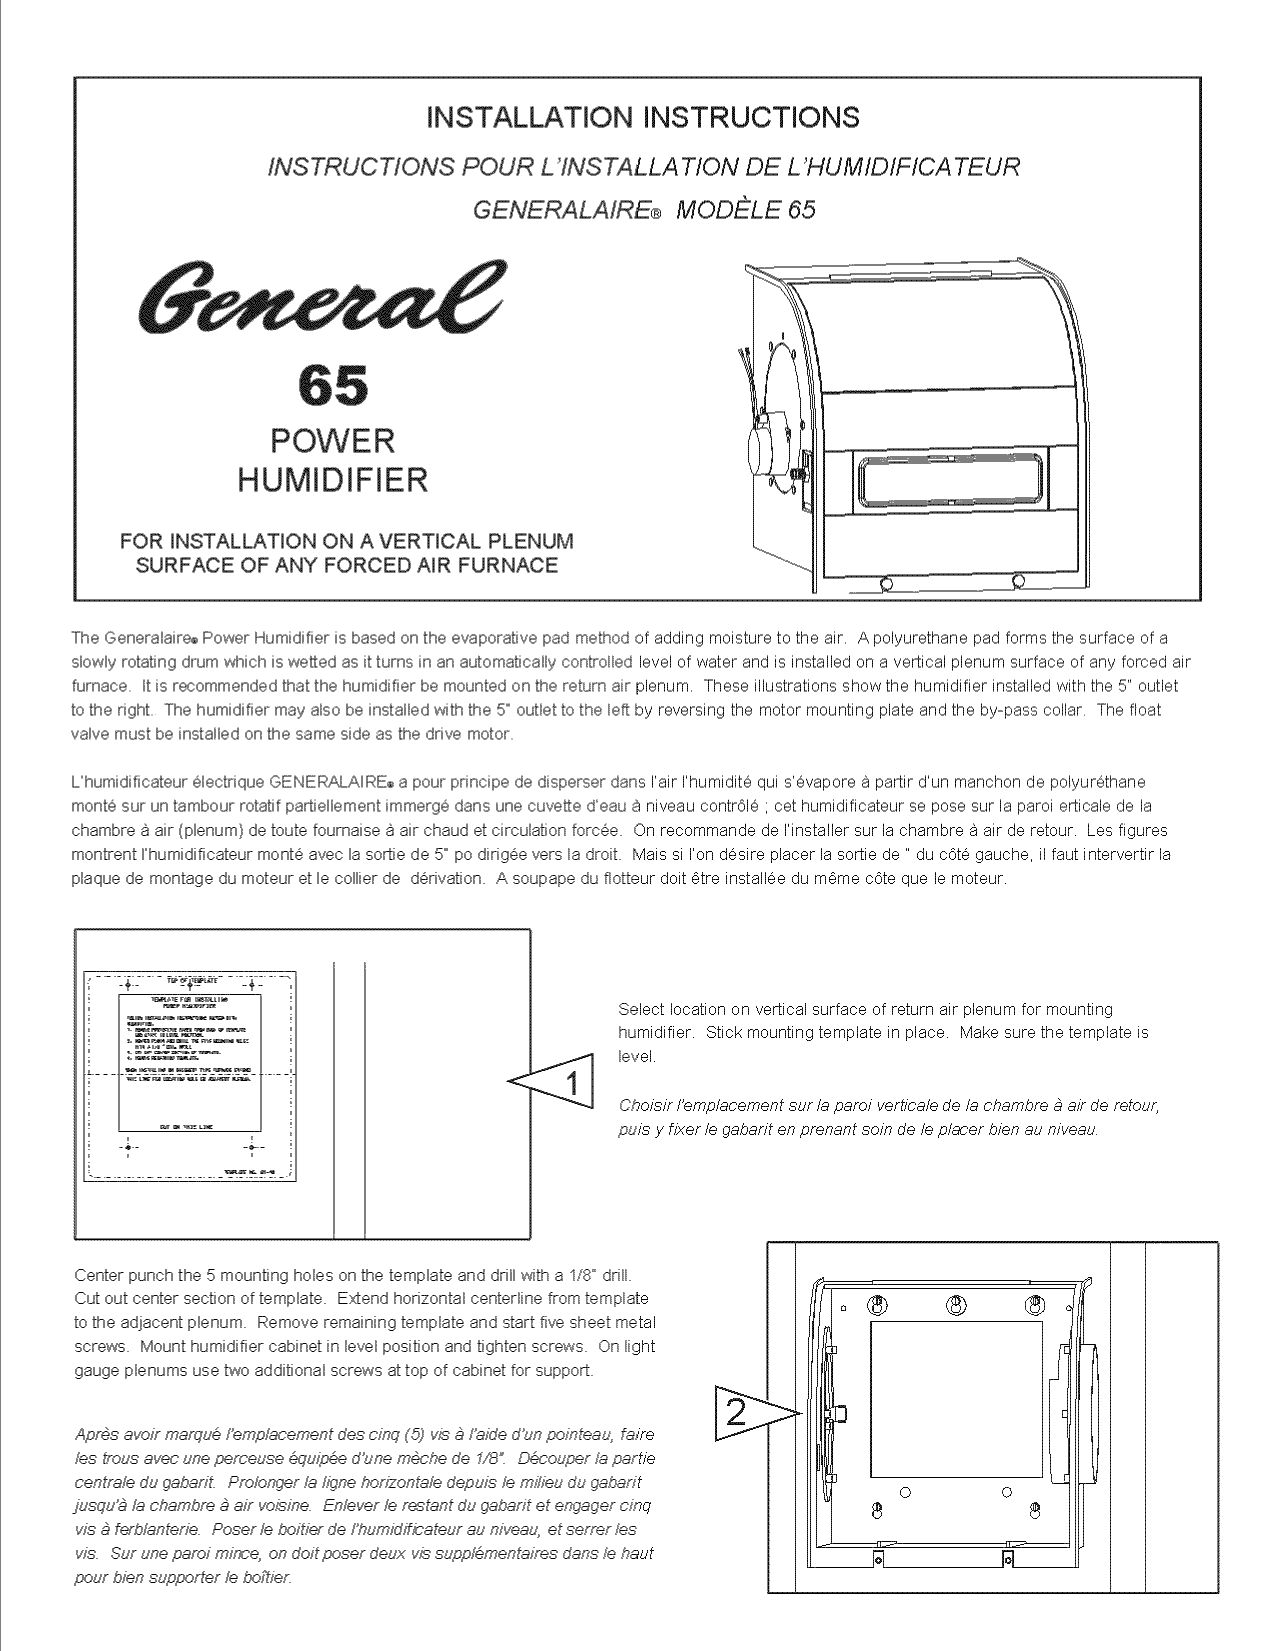 Page 1 of 4 - Generalaire GENERAL 65 User Manual  HUMIDIFIER - Manuals And Guides L1002566